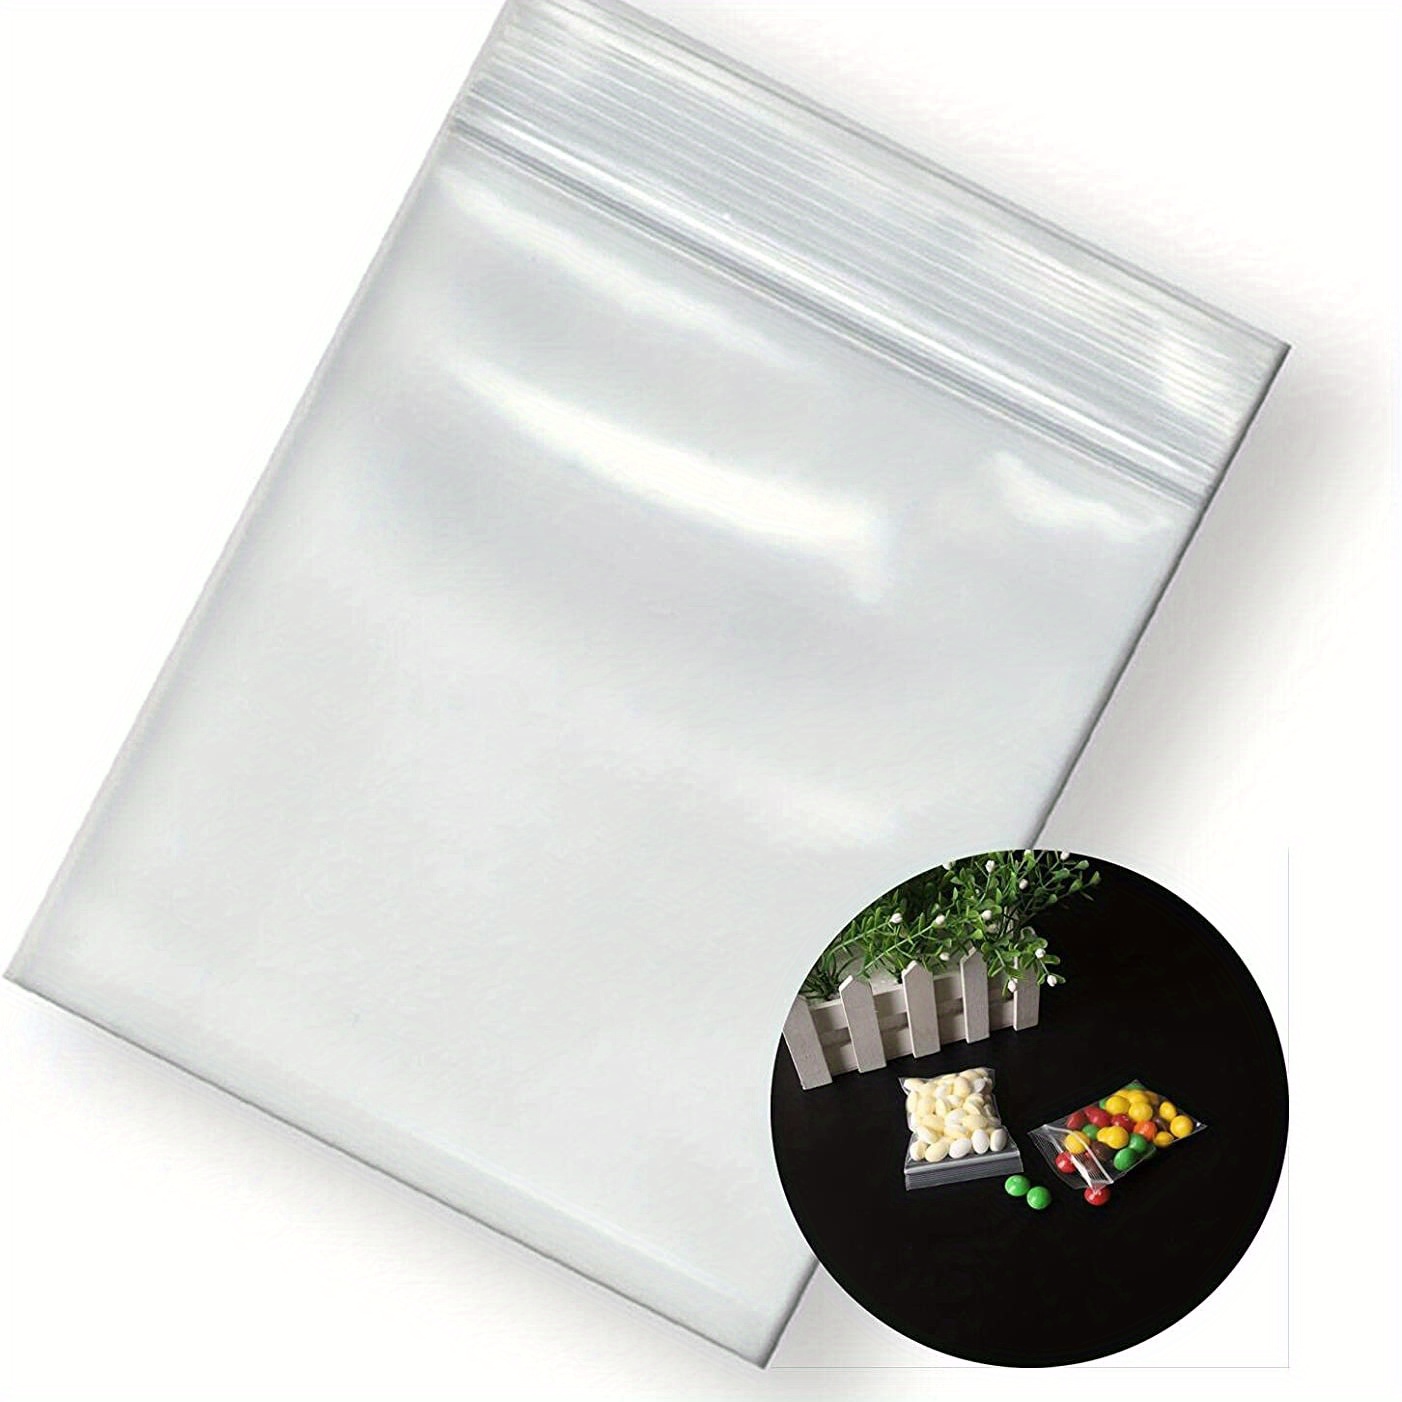  4 x 4 Clear Plastic Reclosable Zip poly Bags with Resealable  Lock Seal Zipper 500 Pack : Industrial & Scientific